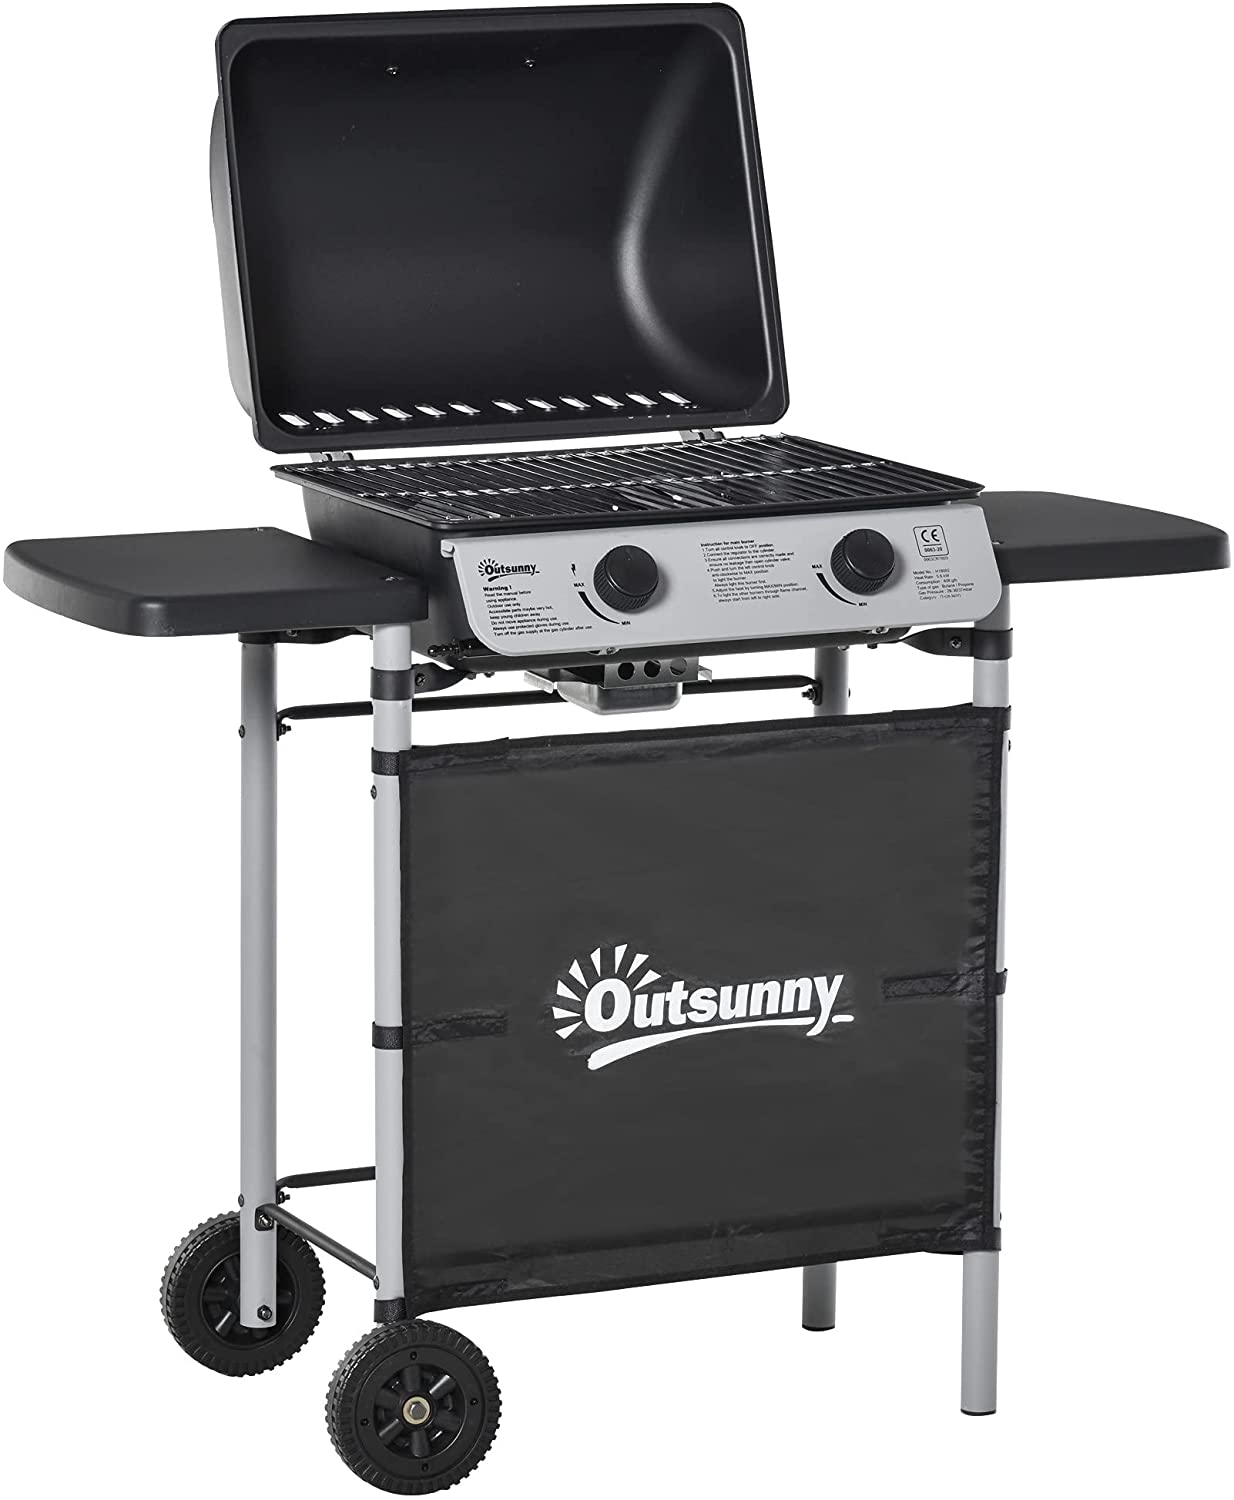 Outsunny Propane Gas Barbecue Grill 2 Burner Cooking BBQ Grill 5.6 kW w/ Side Shelves